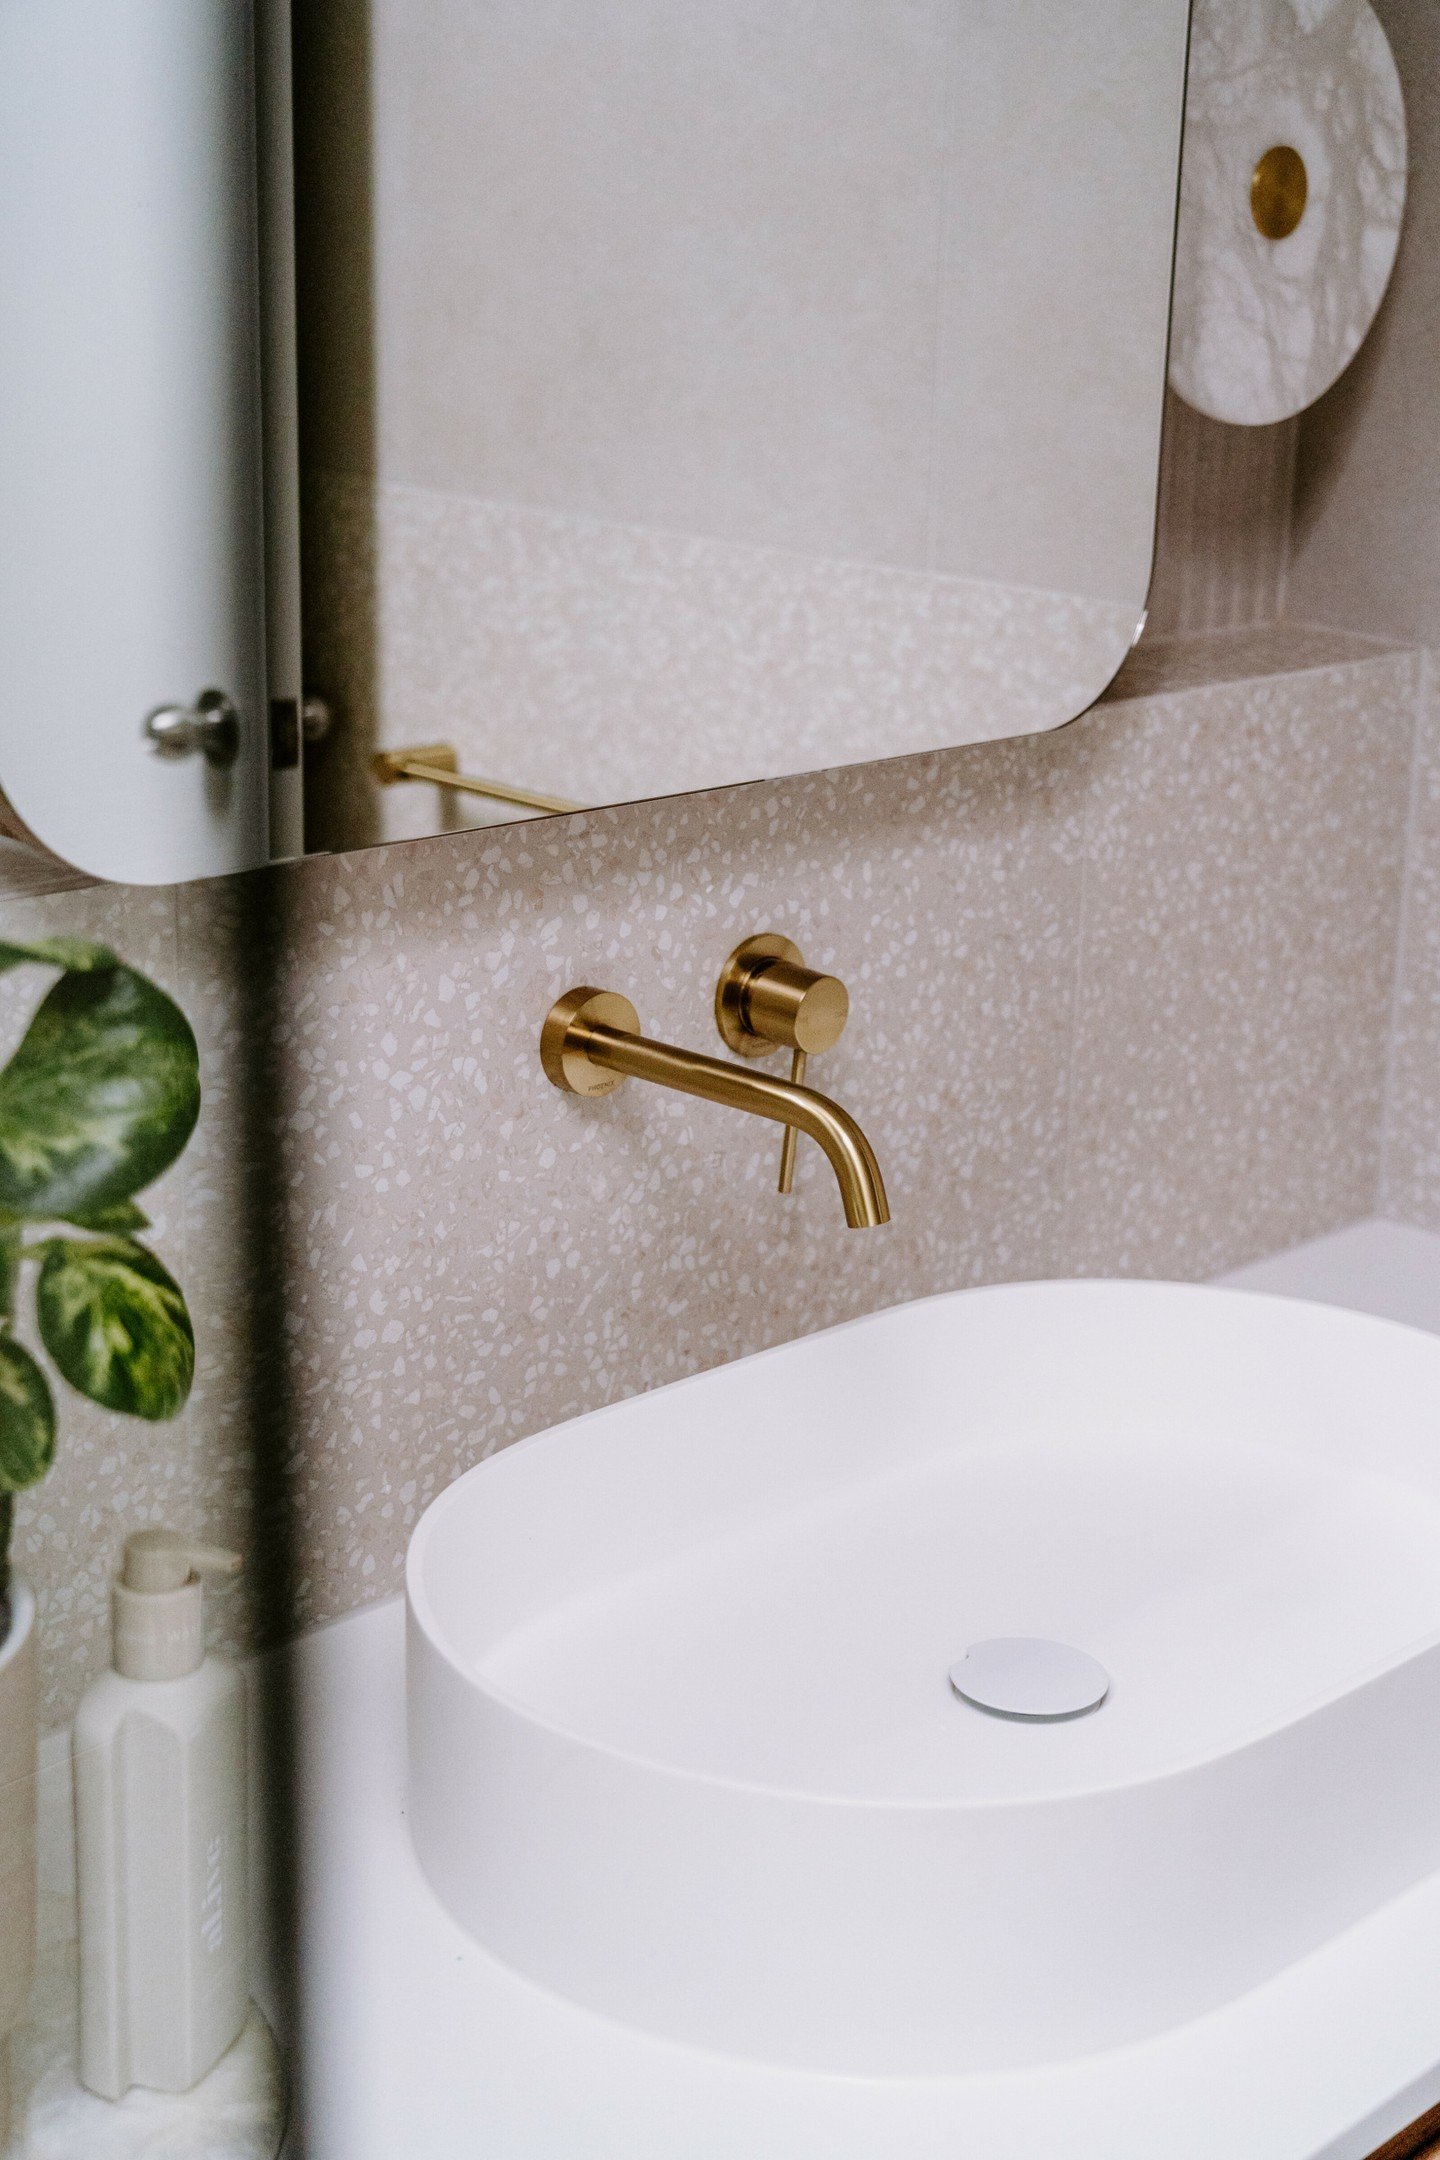 Feng shui for bathrooms! Simple tips to enhance energy flow and relaxation 💦

To improve energy flow in your bathroom, start by keeping it clutter-free and well-organised. Introduce elements that represent wood and water, such as wooden shelves and 